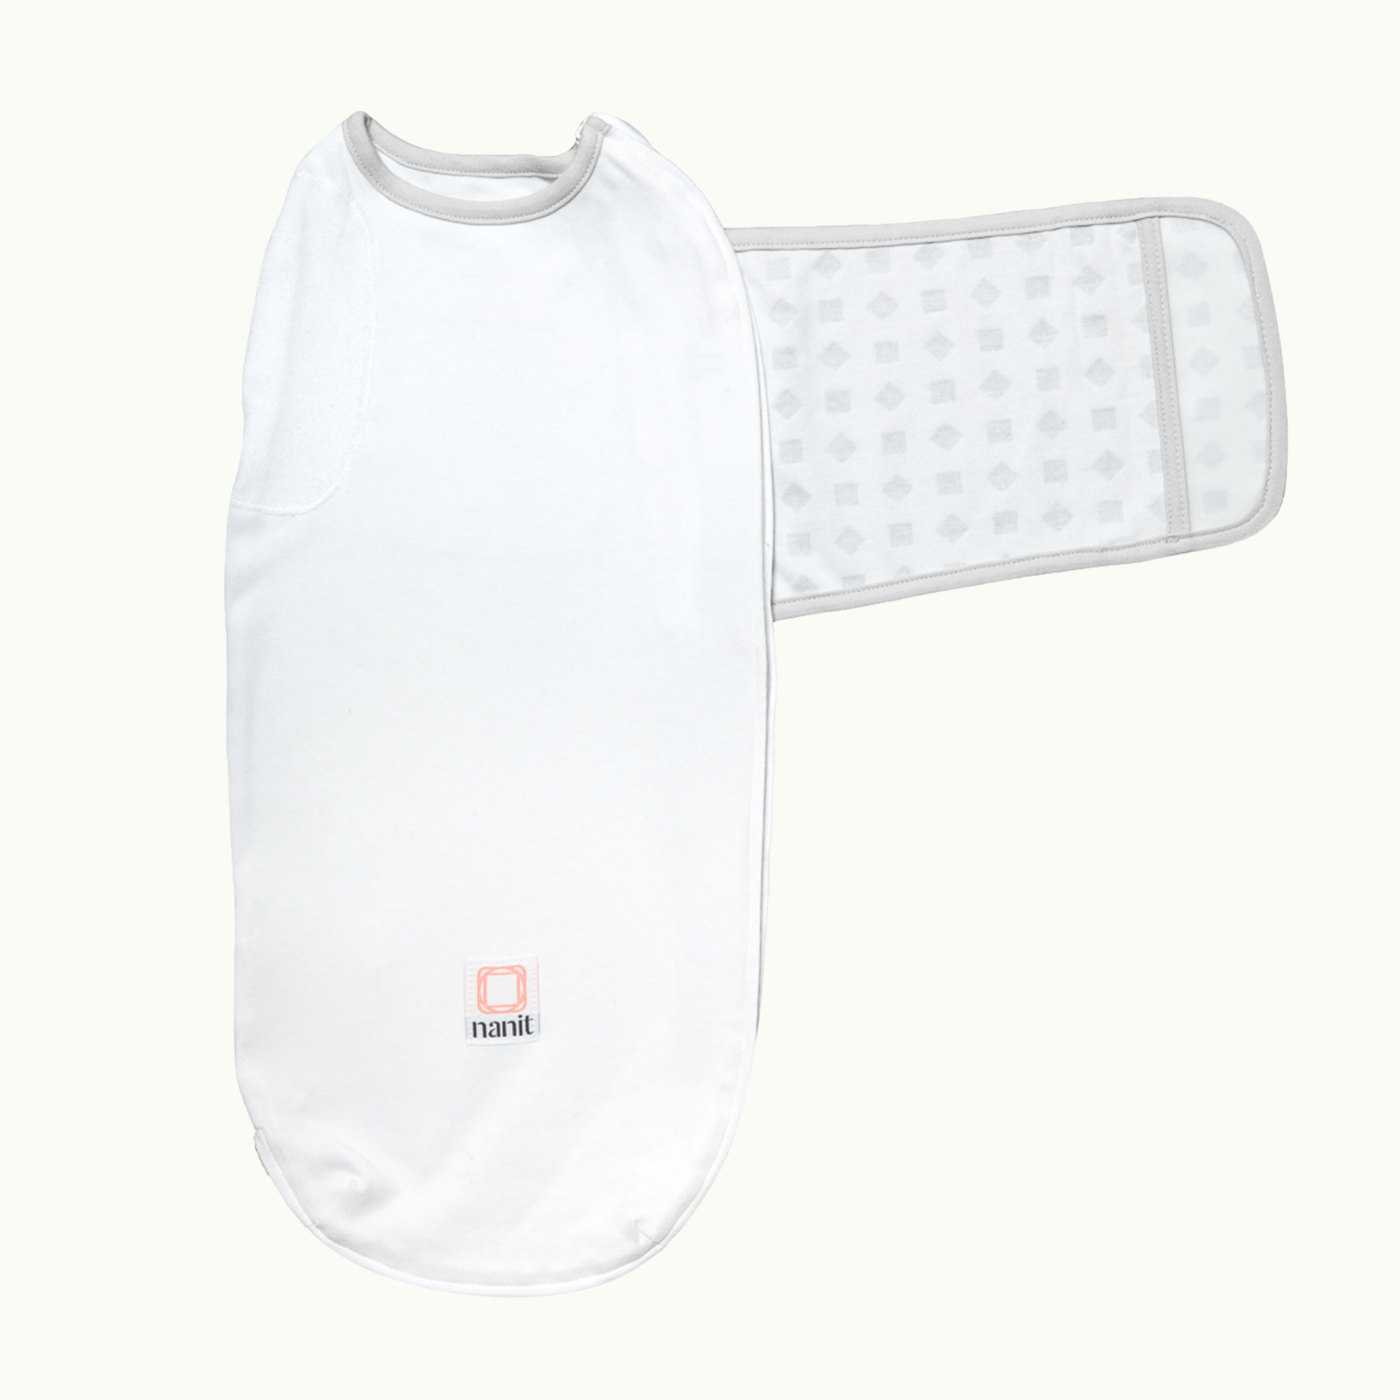 nanit swaddle with velcro off in gray